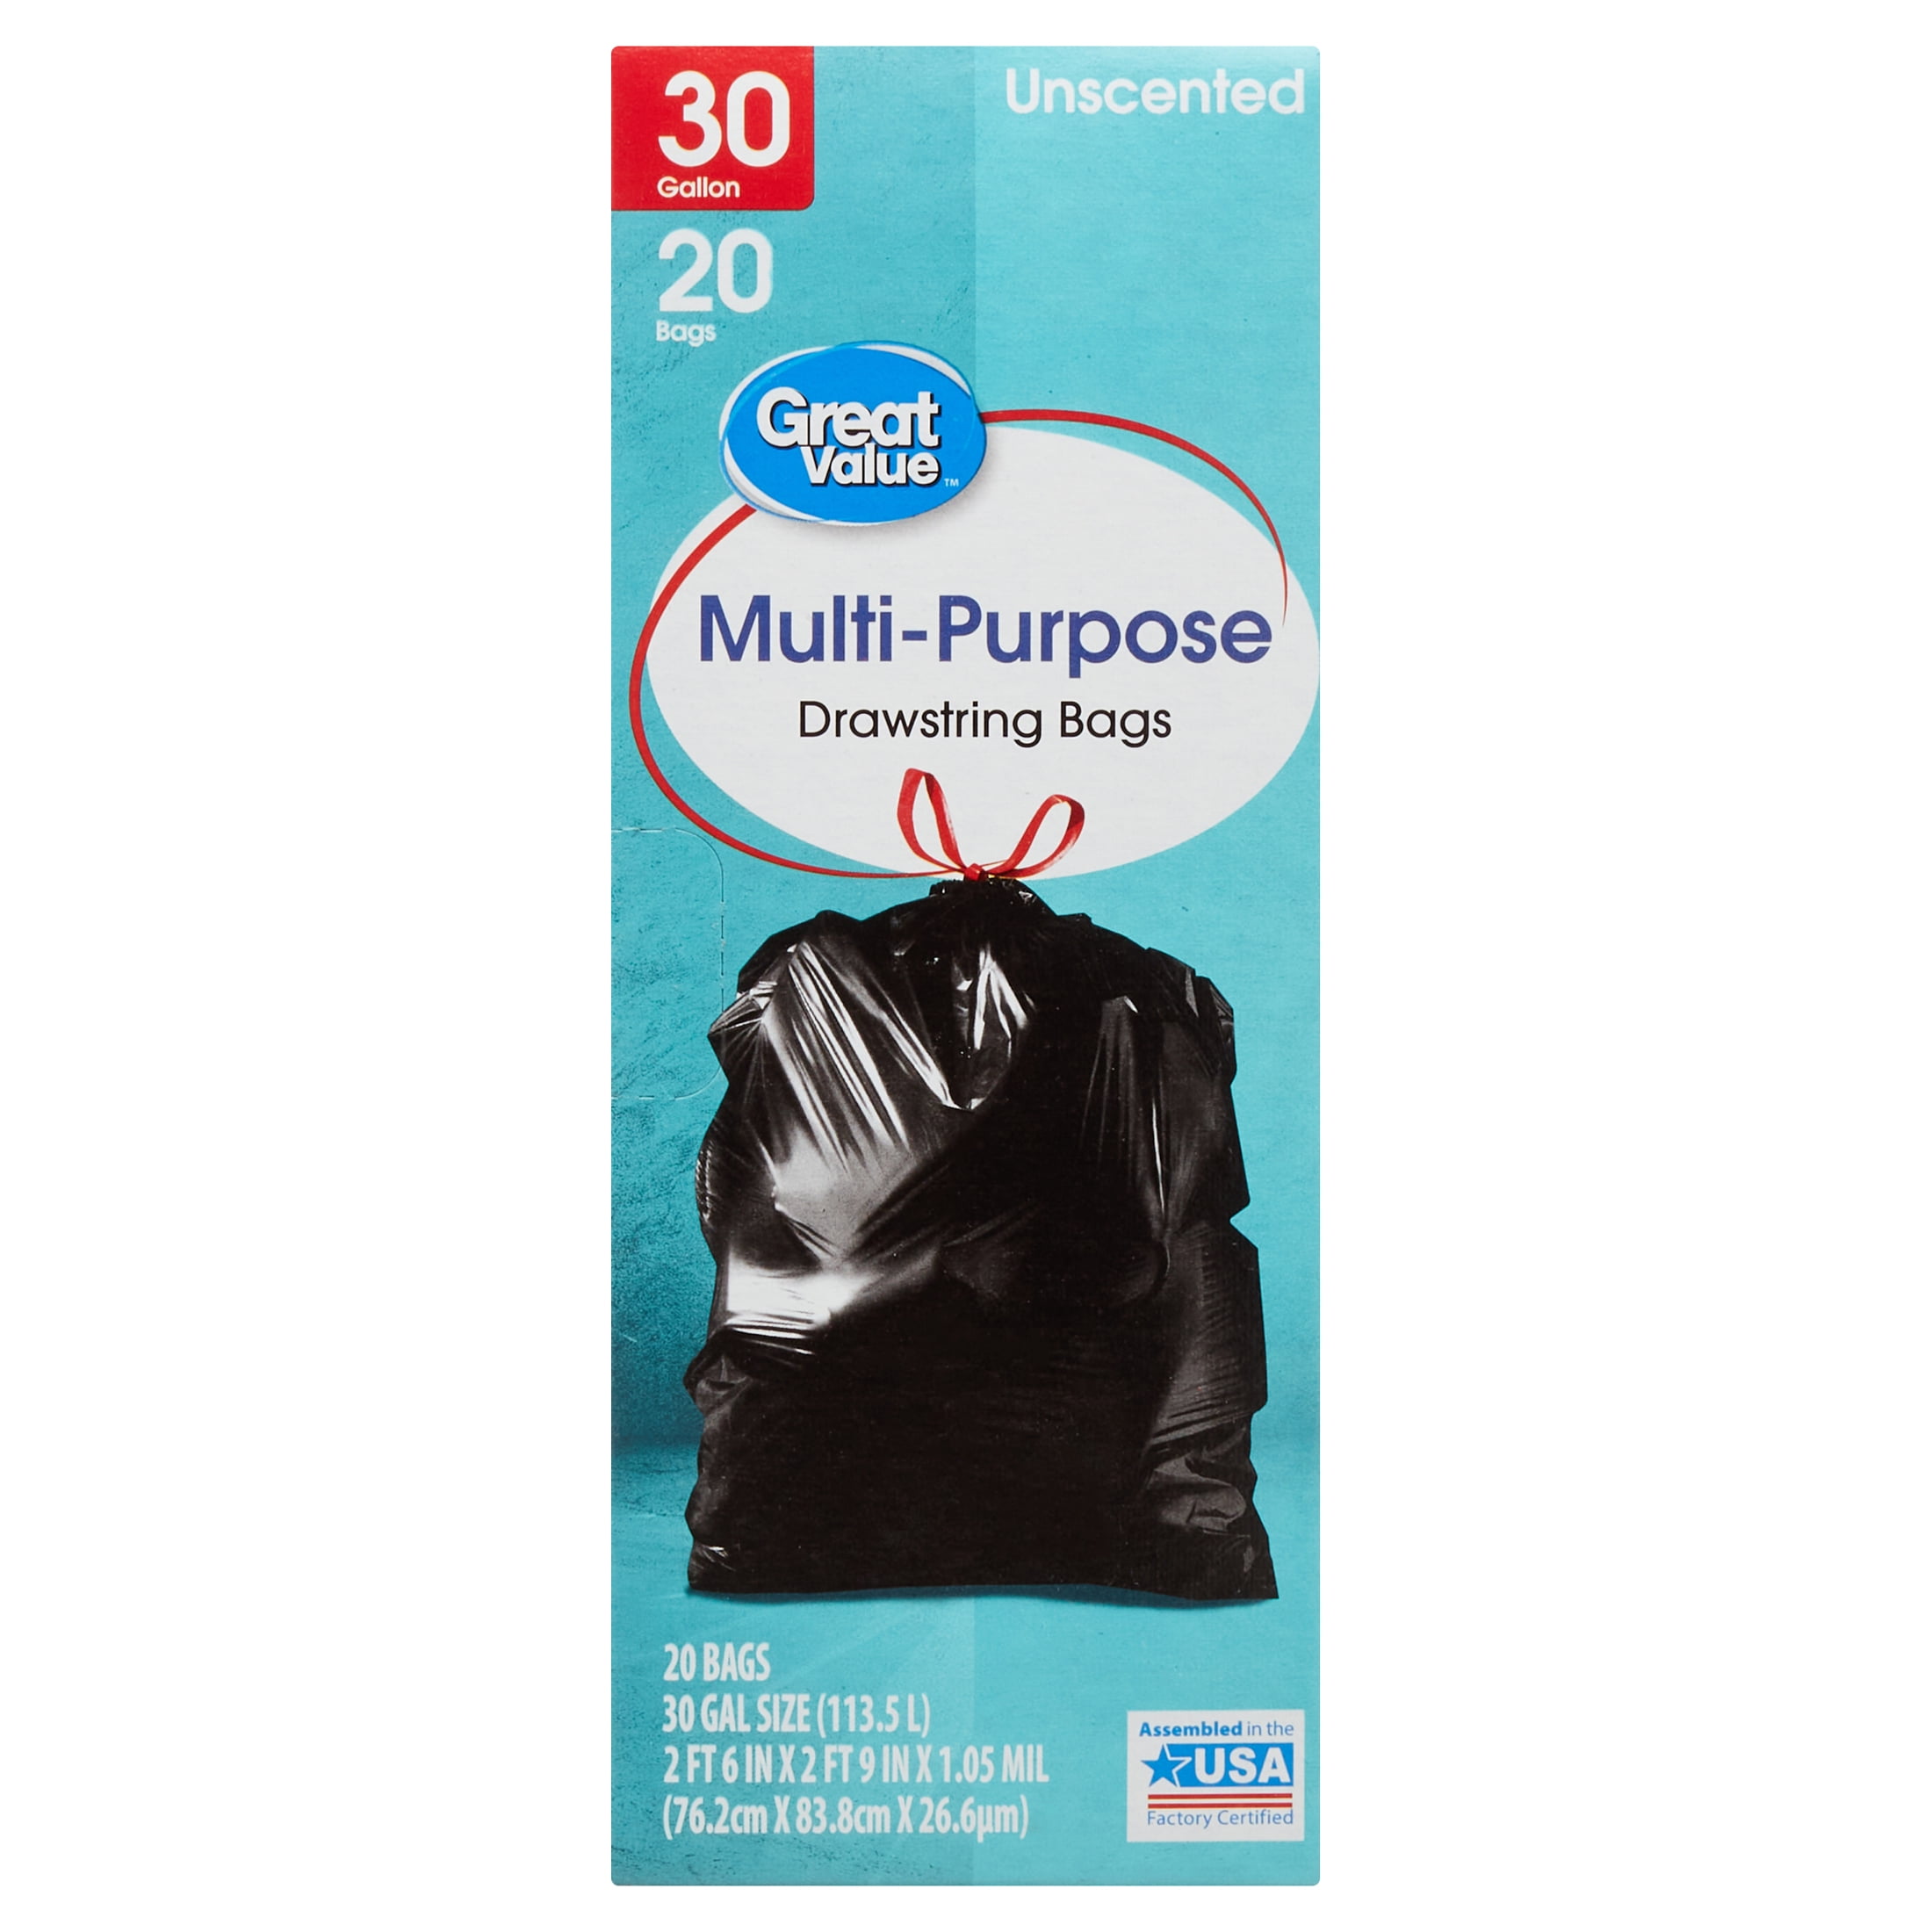 Ultrasac 20-30 Gallon 0.8 Mil Clear Drawstring Trash Bags - 30 x 33 - Pack of 36 - for Home, Kitchen, Bathroom, & Office